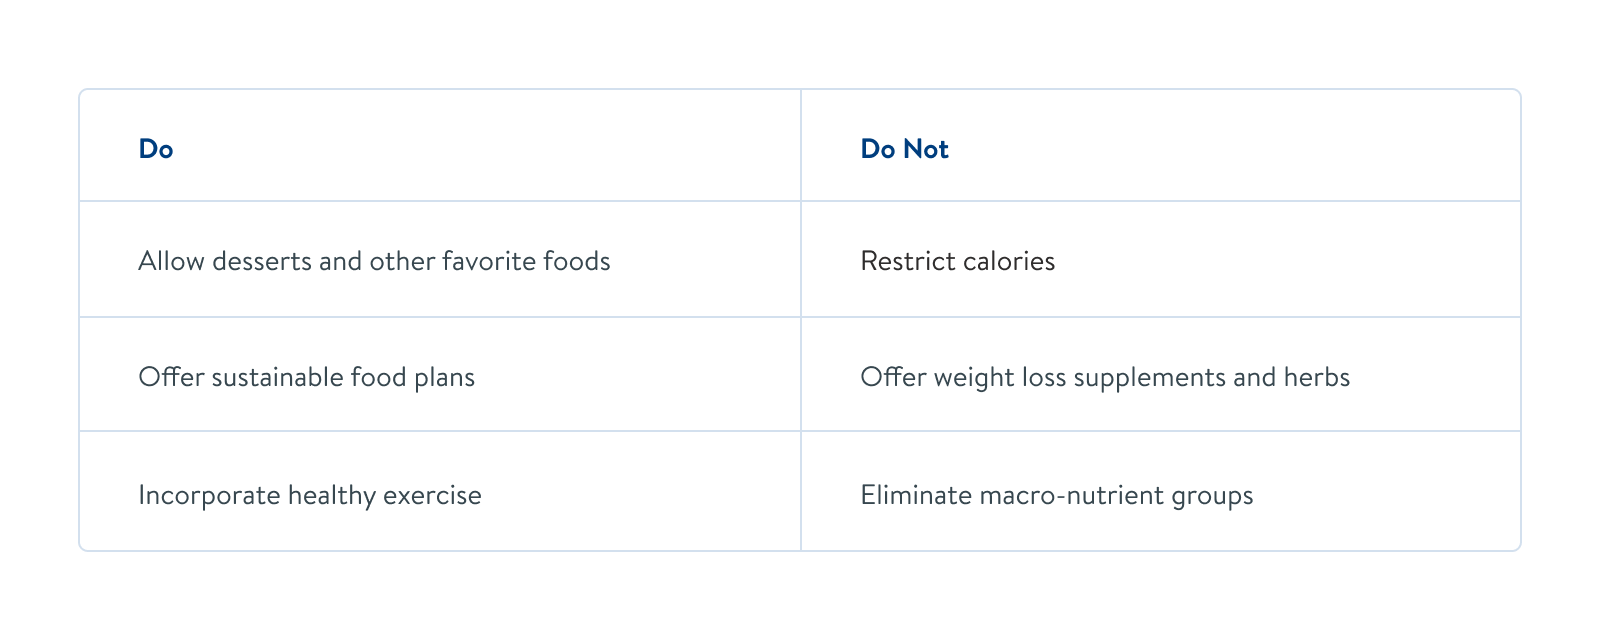 Do: Allow desserts and other favorite foods; Do not: restrict calories. Do: Offer sustainable food plans; Do not: Offer weight loss supplements and herbs. Do: Incorporate healthy exercise; Do not: Eliminate macro-nutrient groups.